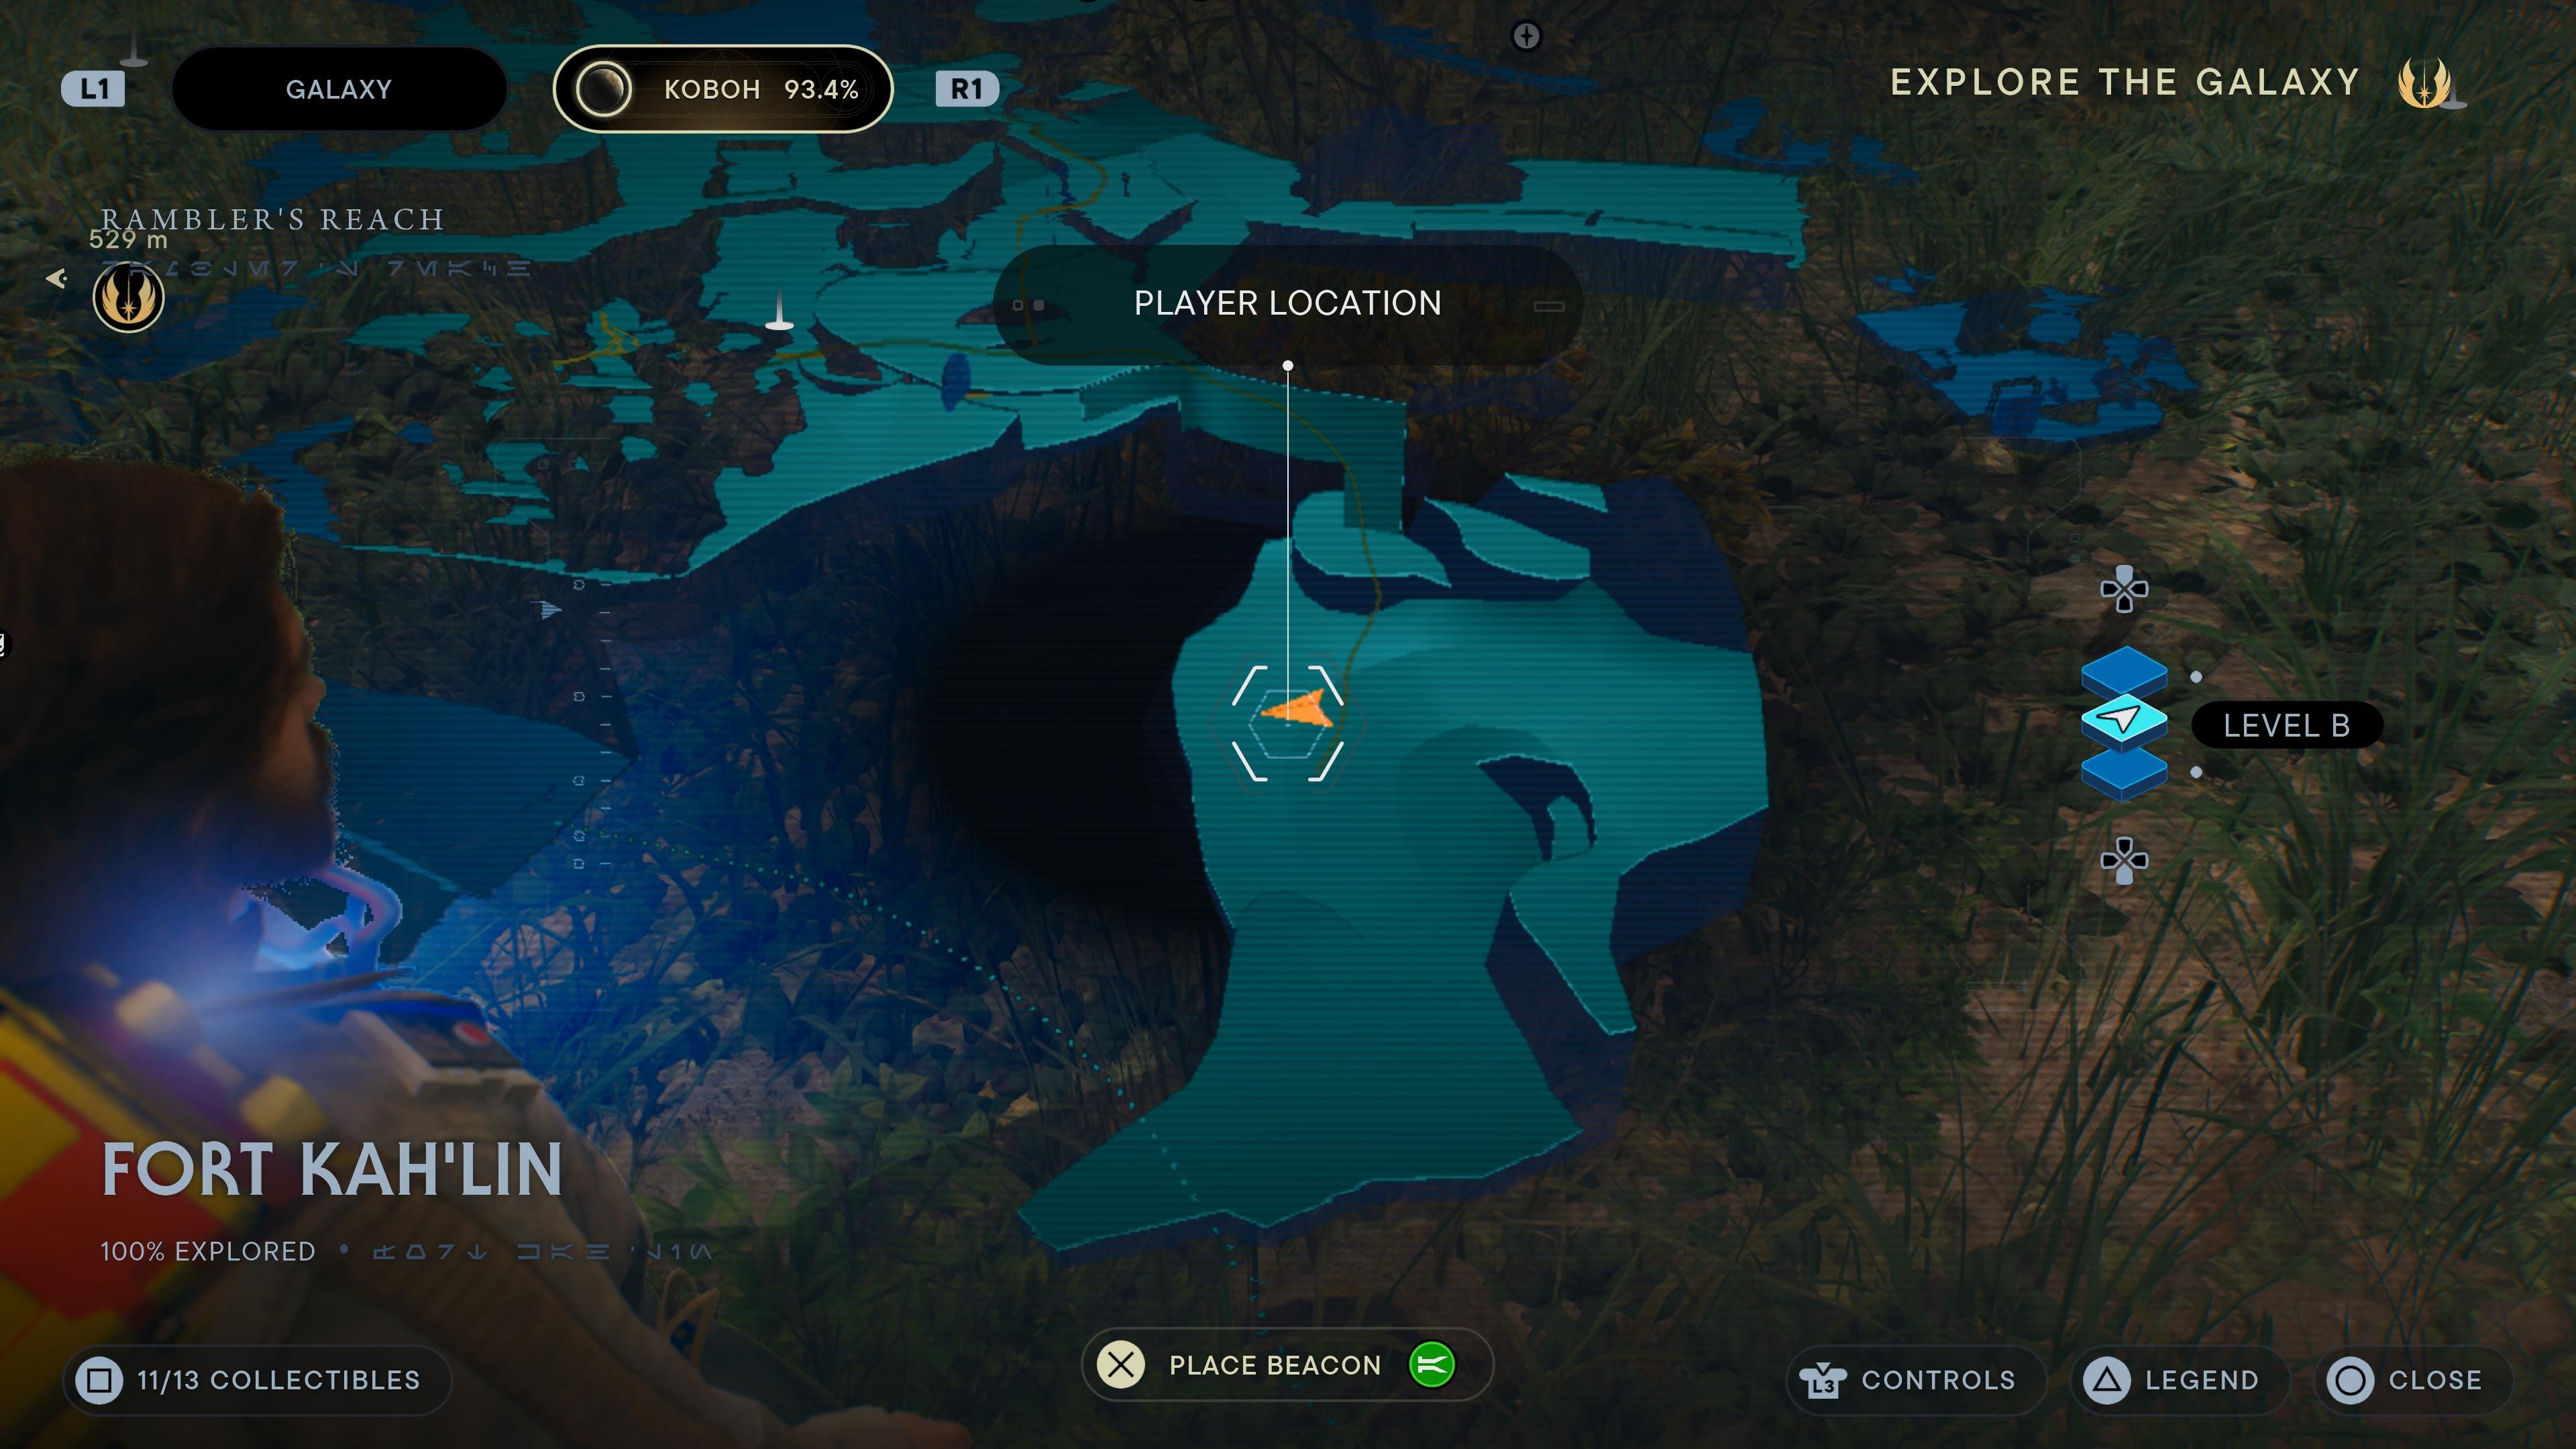 Map showing seed pod 1 location in Fort Kah'lin in Jedi Survivor